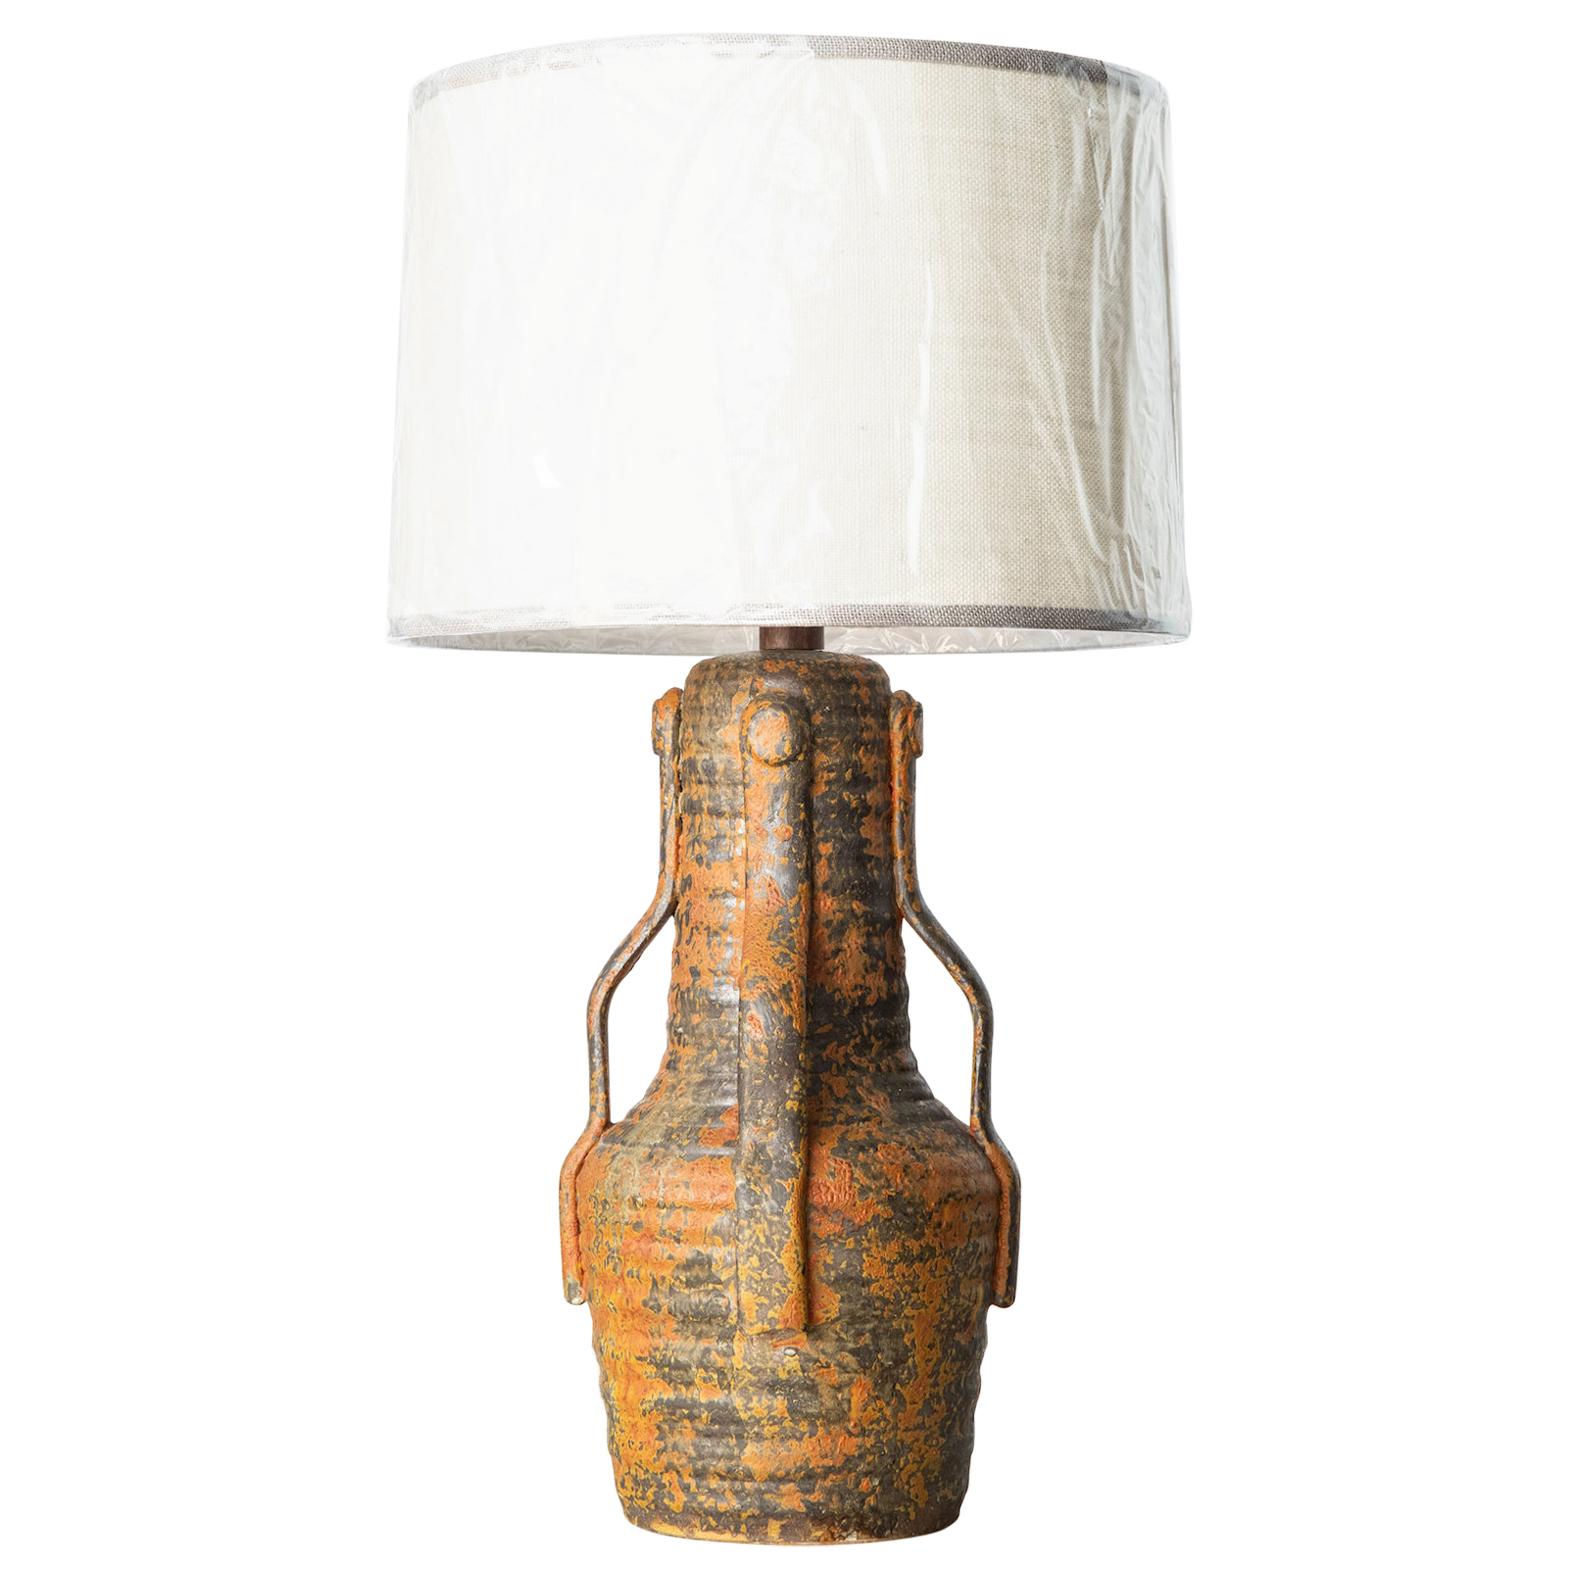 Brutalist Midcentury Glazed Ceramic Table Lamp Attributed to Martz For Sale